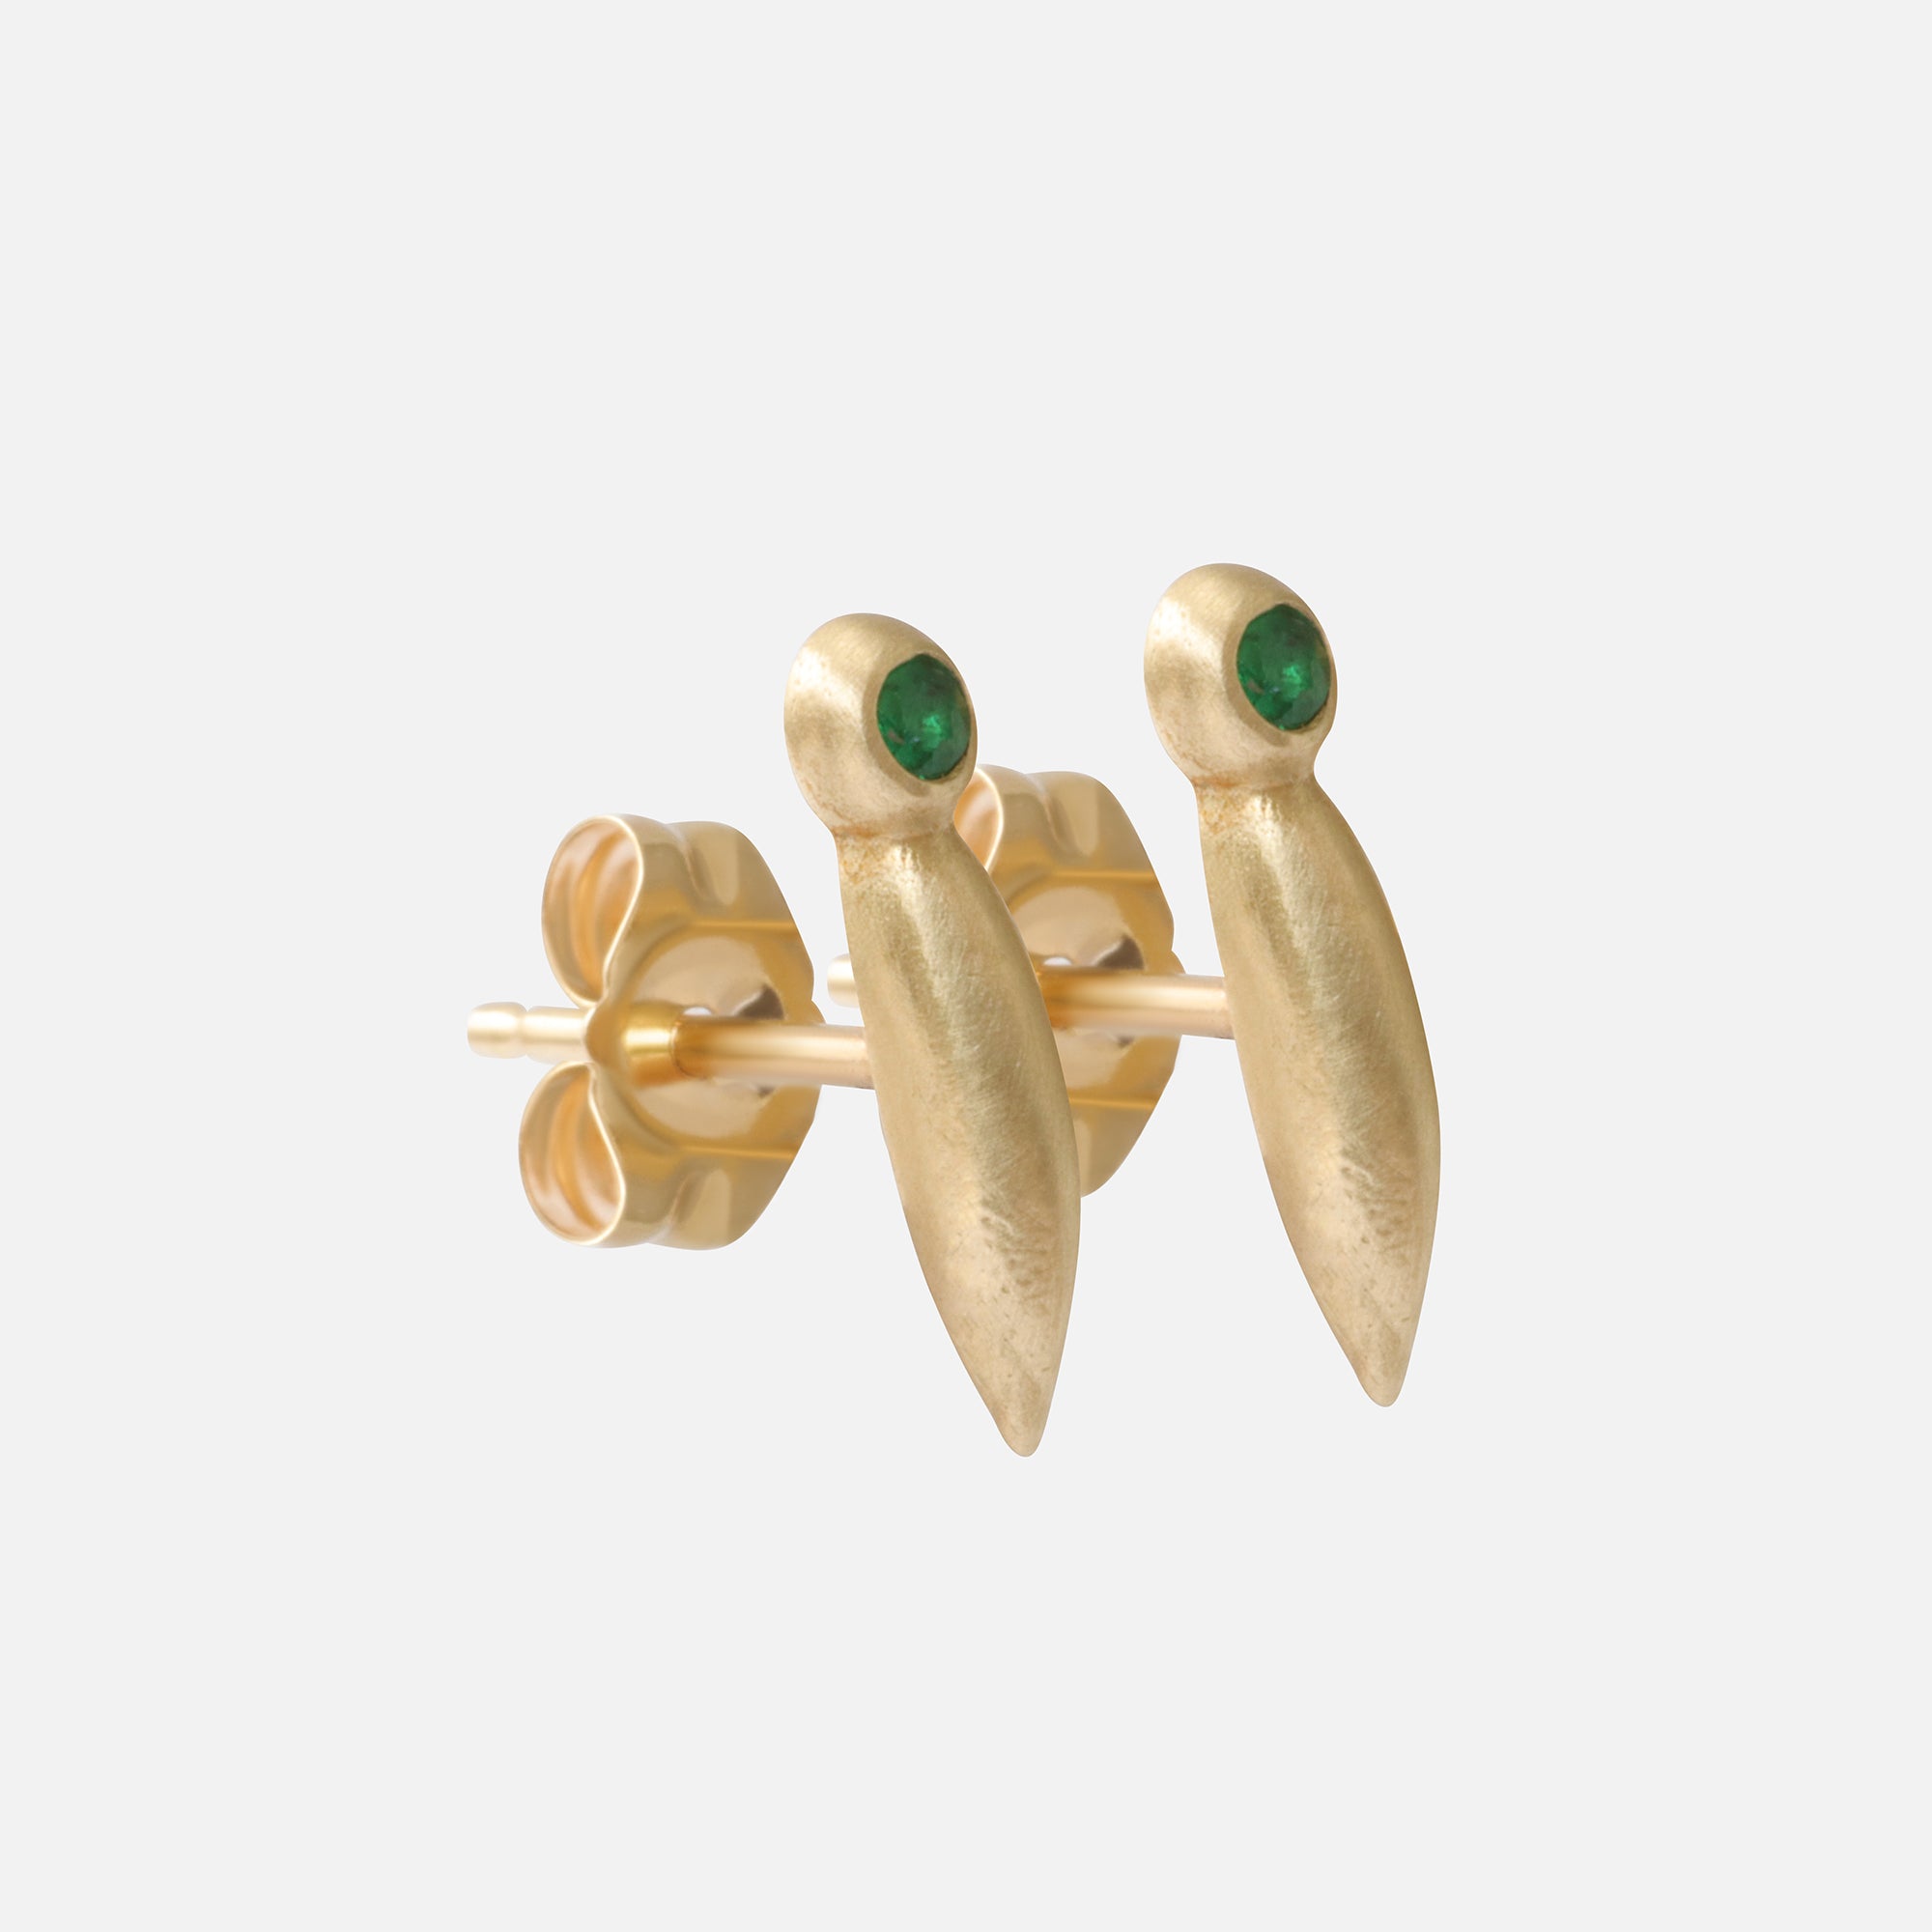 Emerald Bug / Studs By Tricia Kirkland in earrings Category